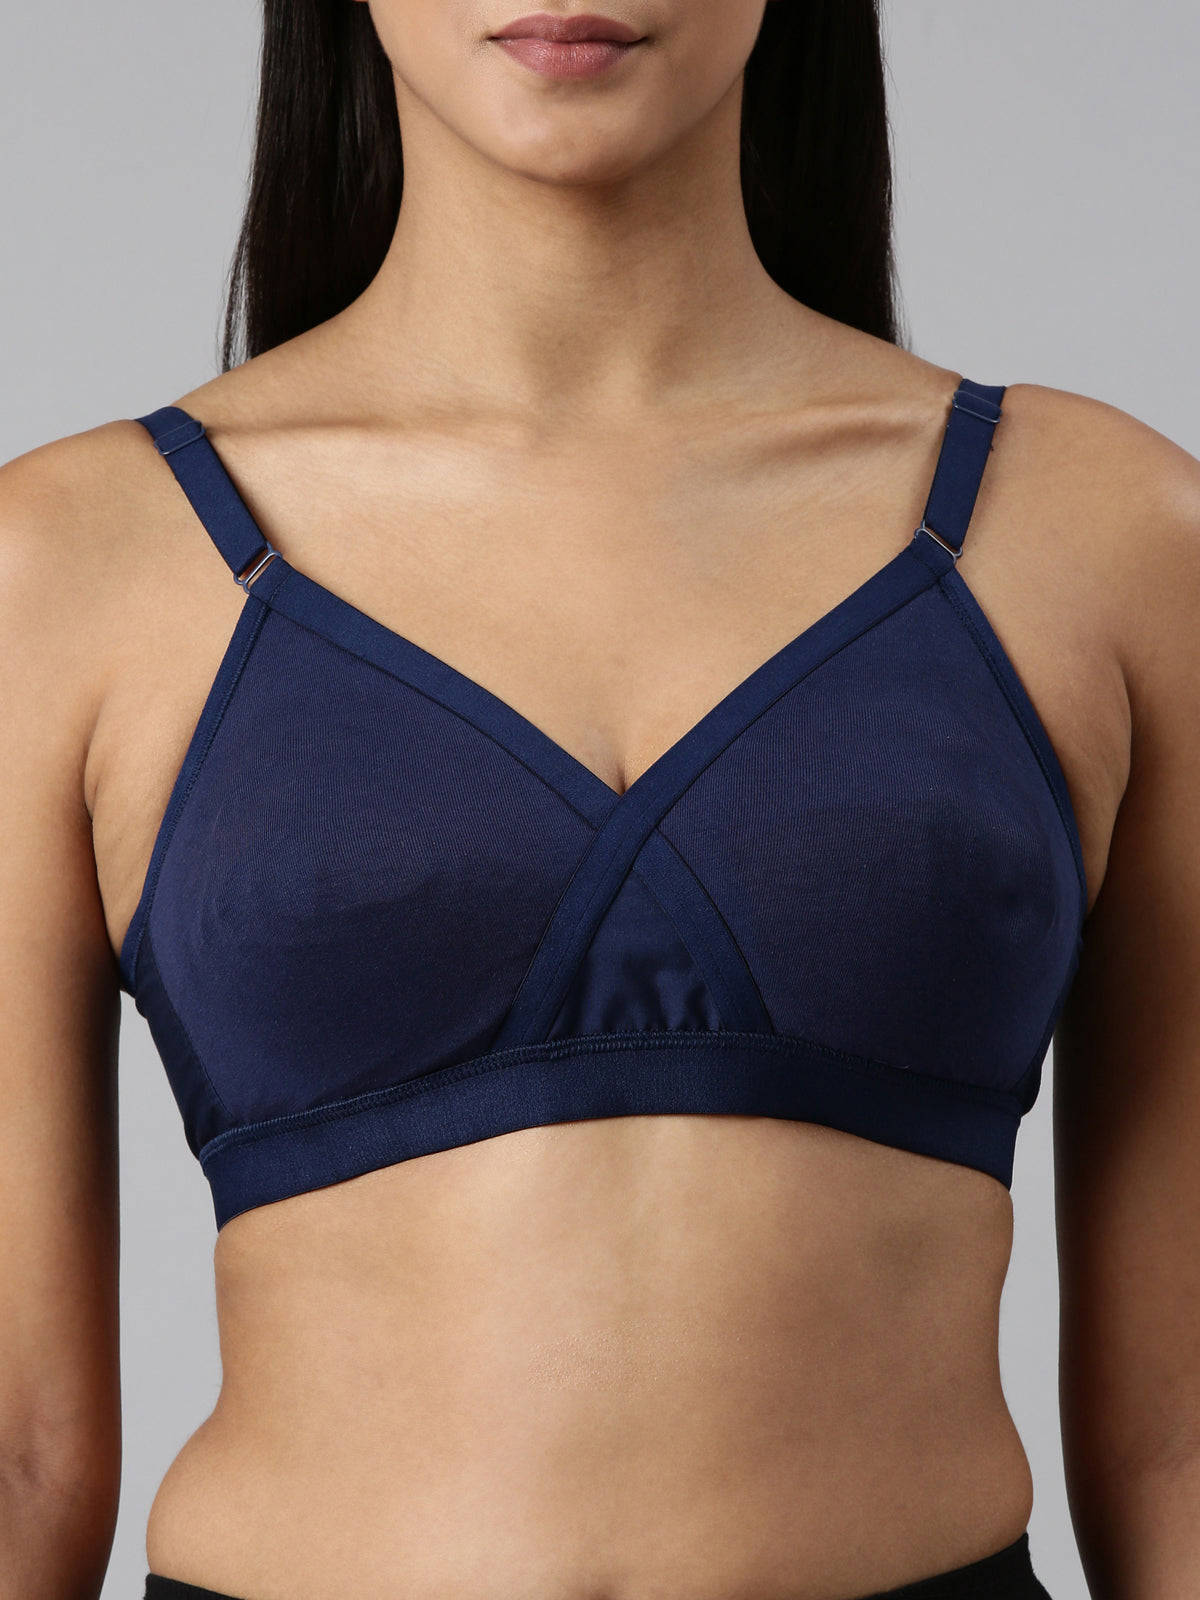 blossom-cotton cross-navyblue1-Woven knitted-supportbra